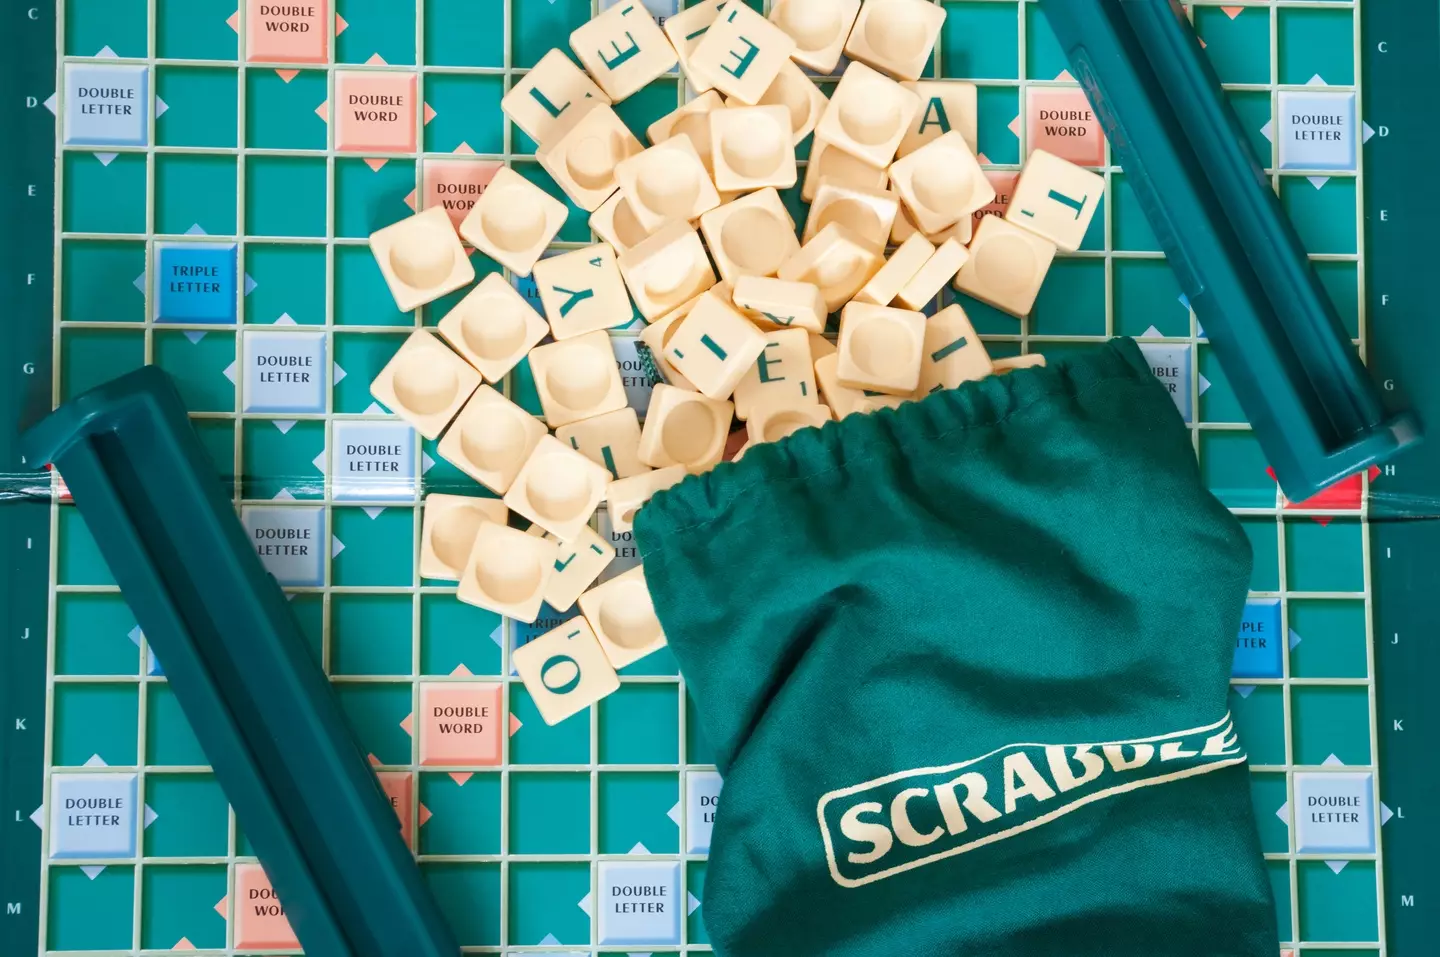 Scrabble is a ruthless business.